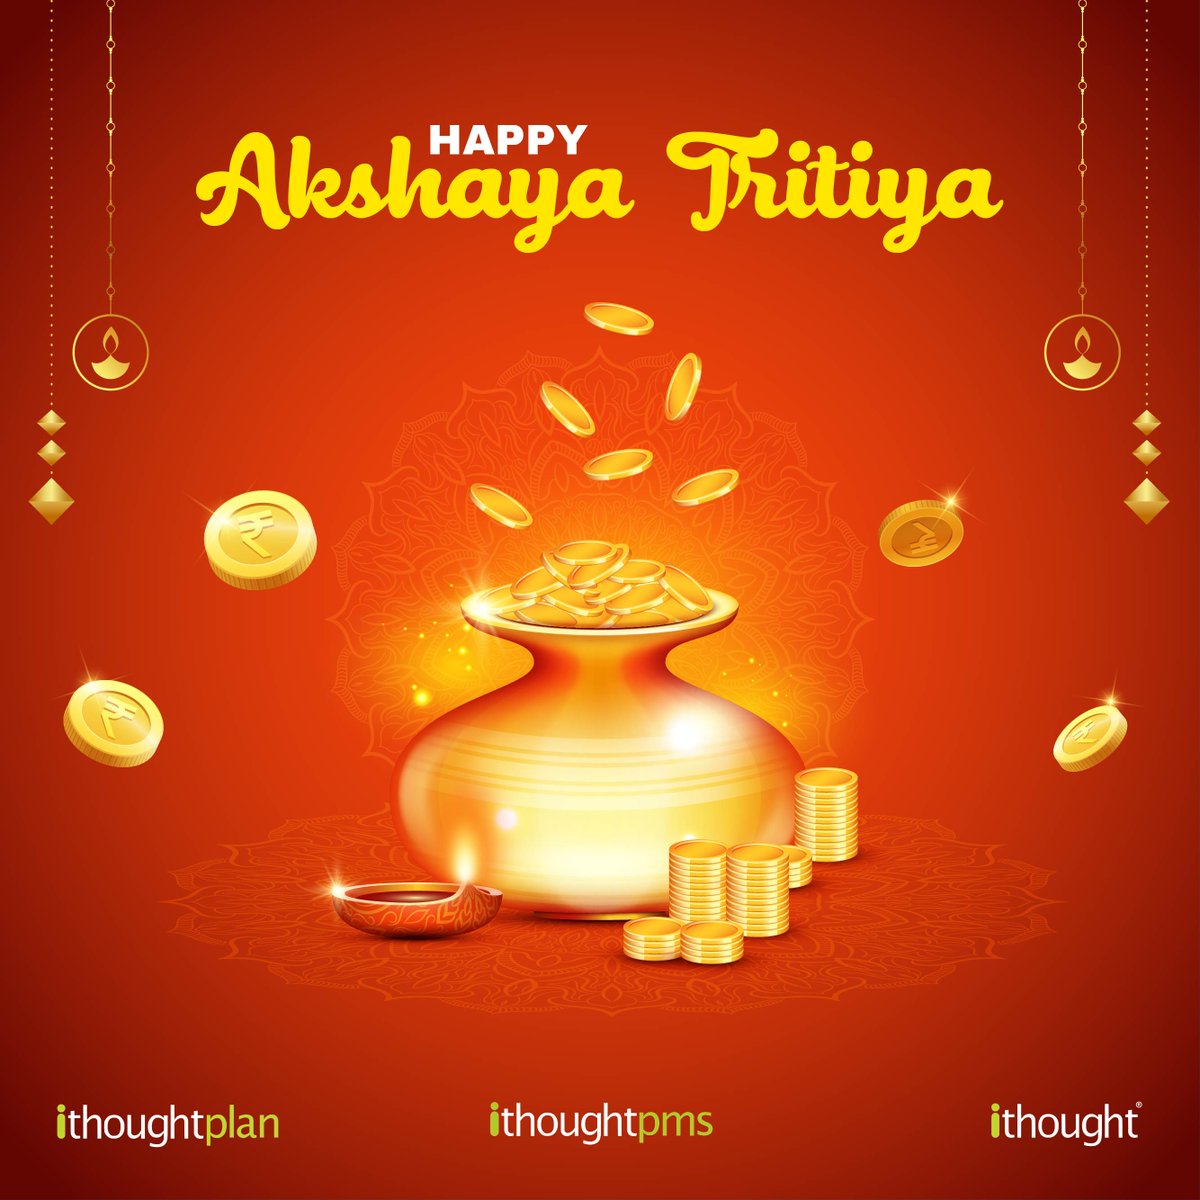 Happy Akshaya Tritiya 2024! #Akshayatritiya #akshayatriti #festival #ithoughtpms